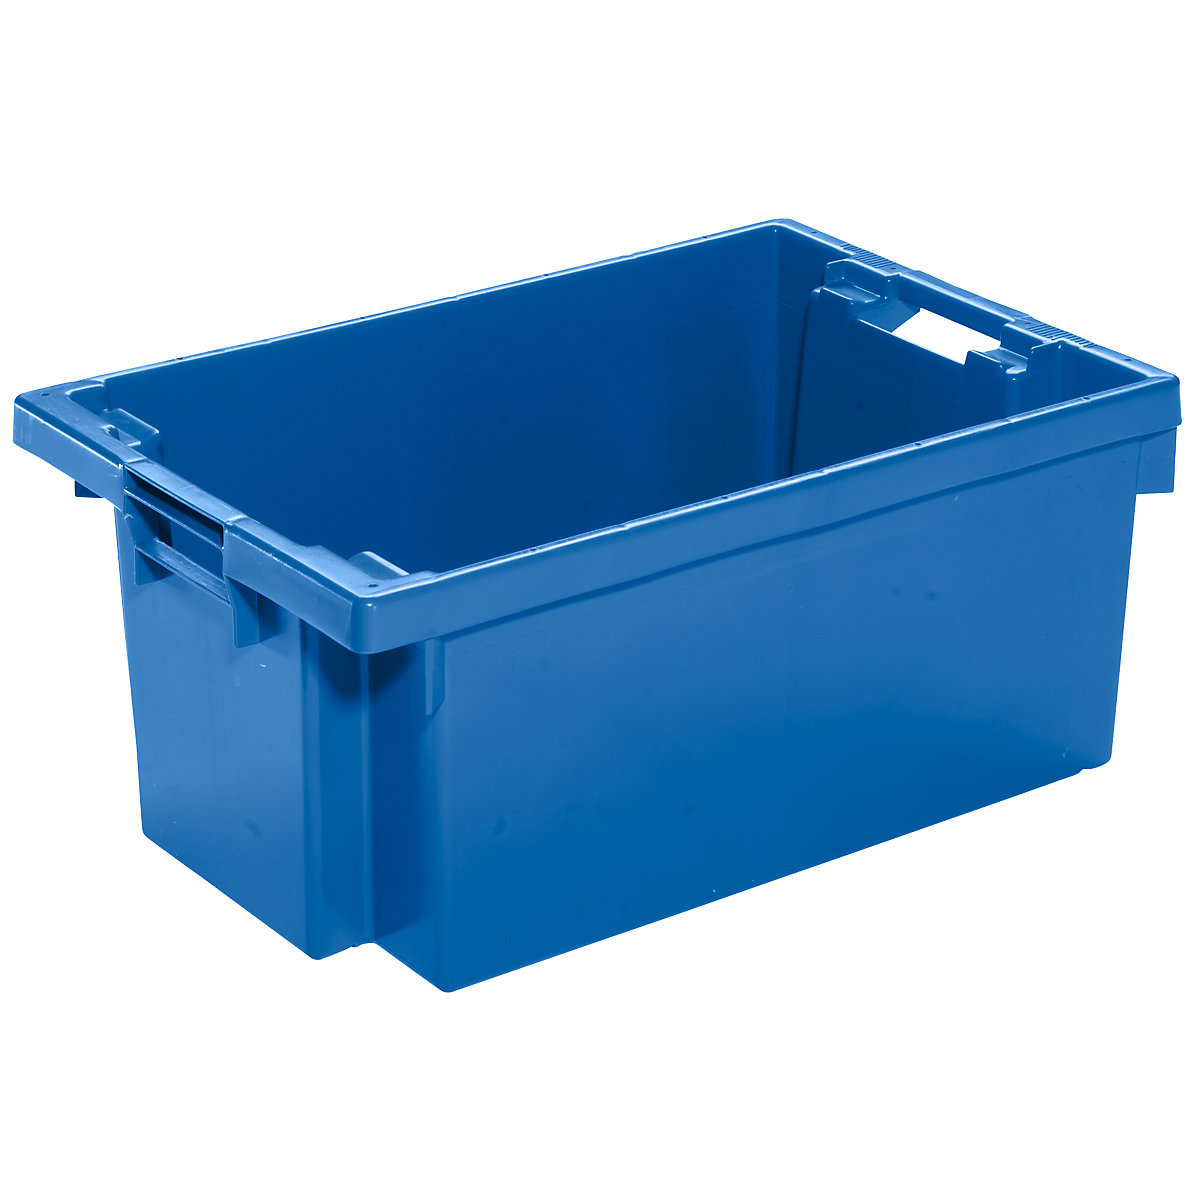 Stack/nest container made of HDPE, capacity 40 l, solid walls and base, blue